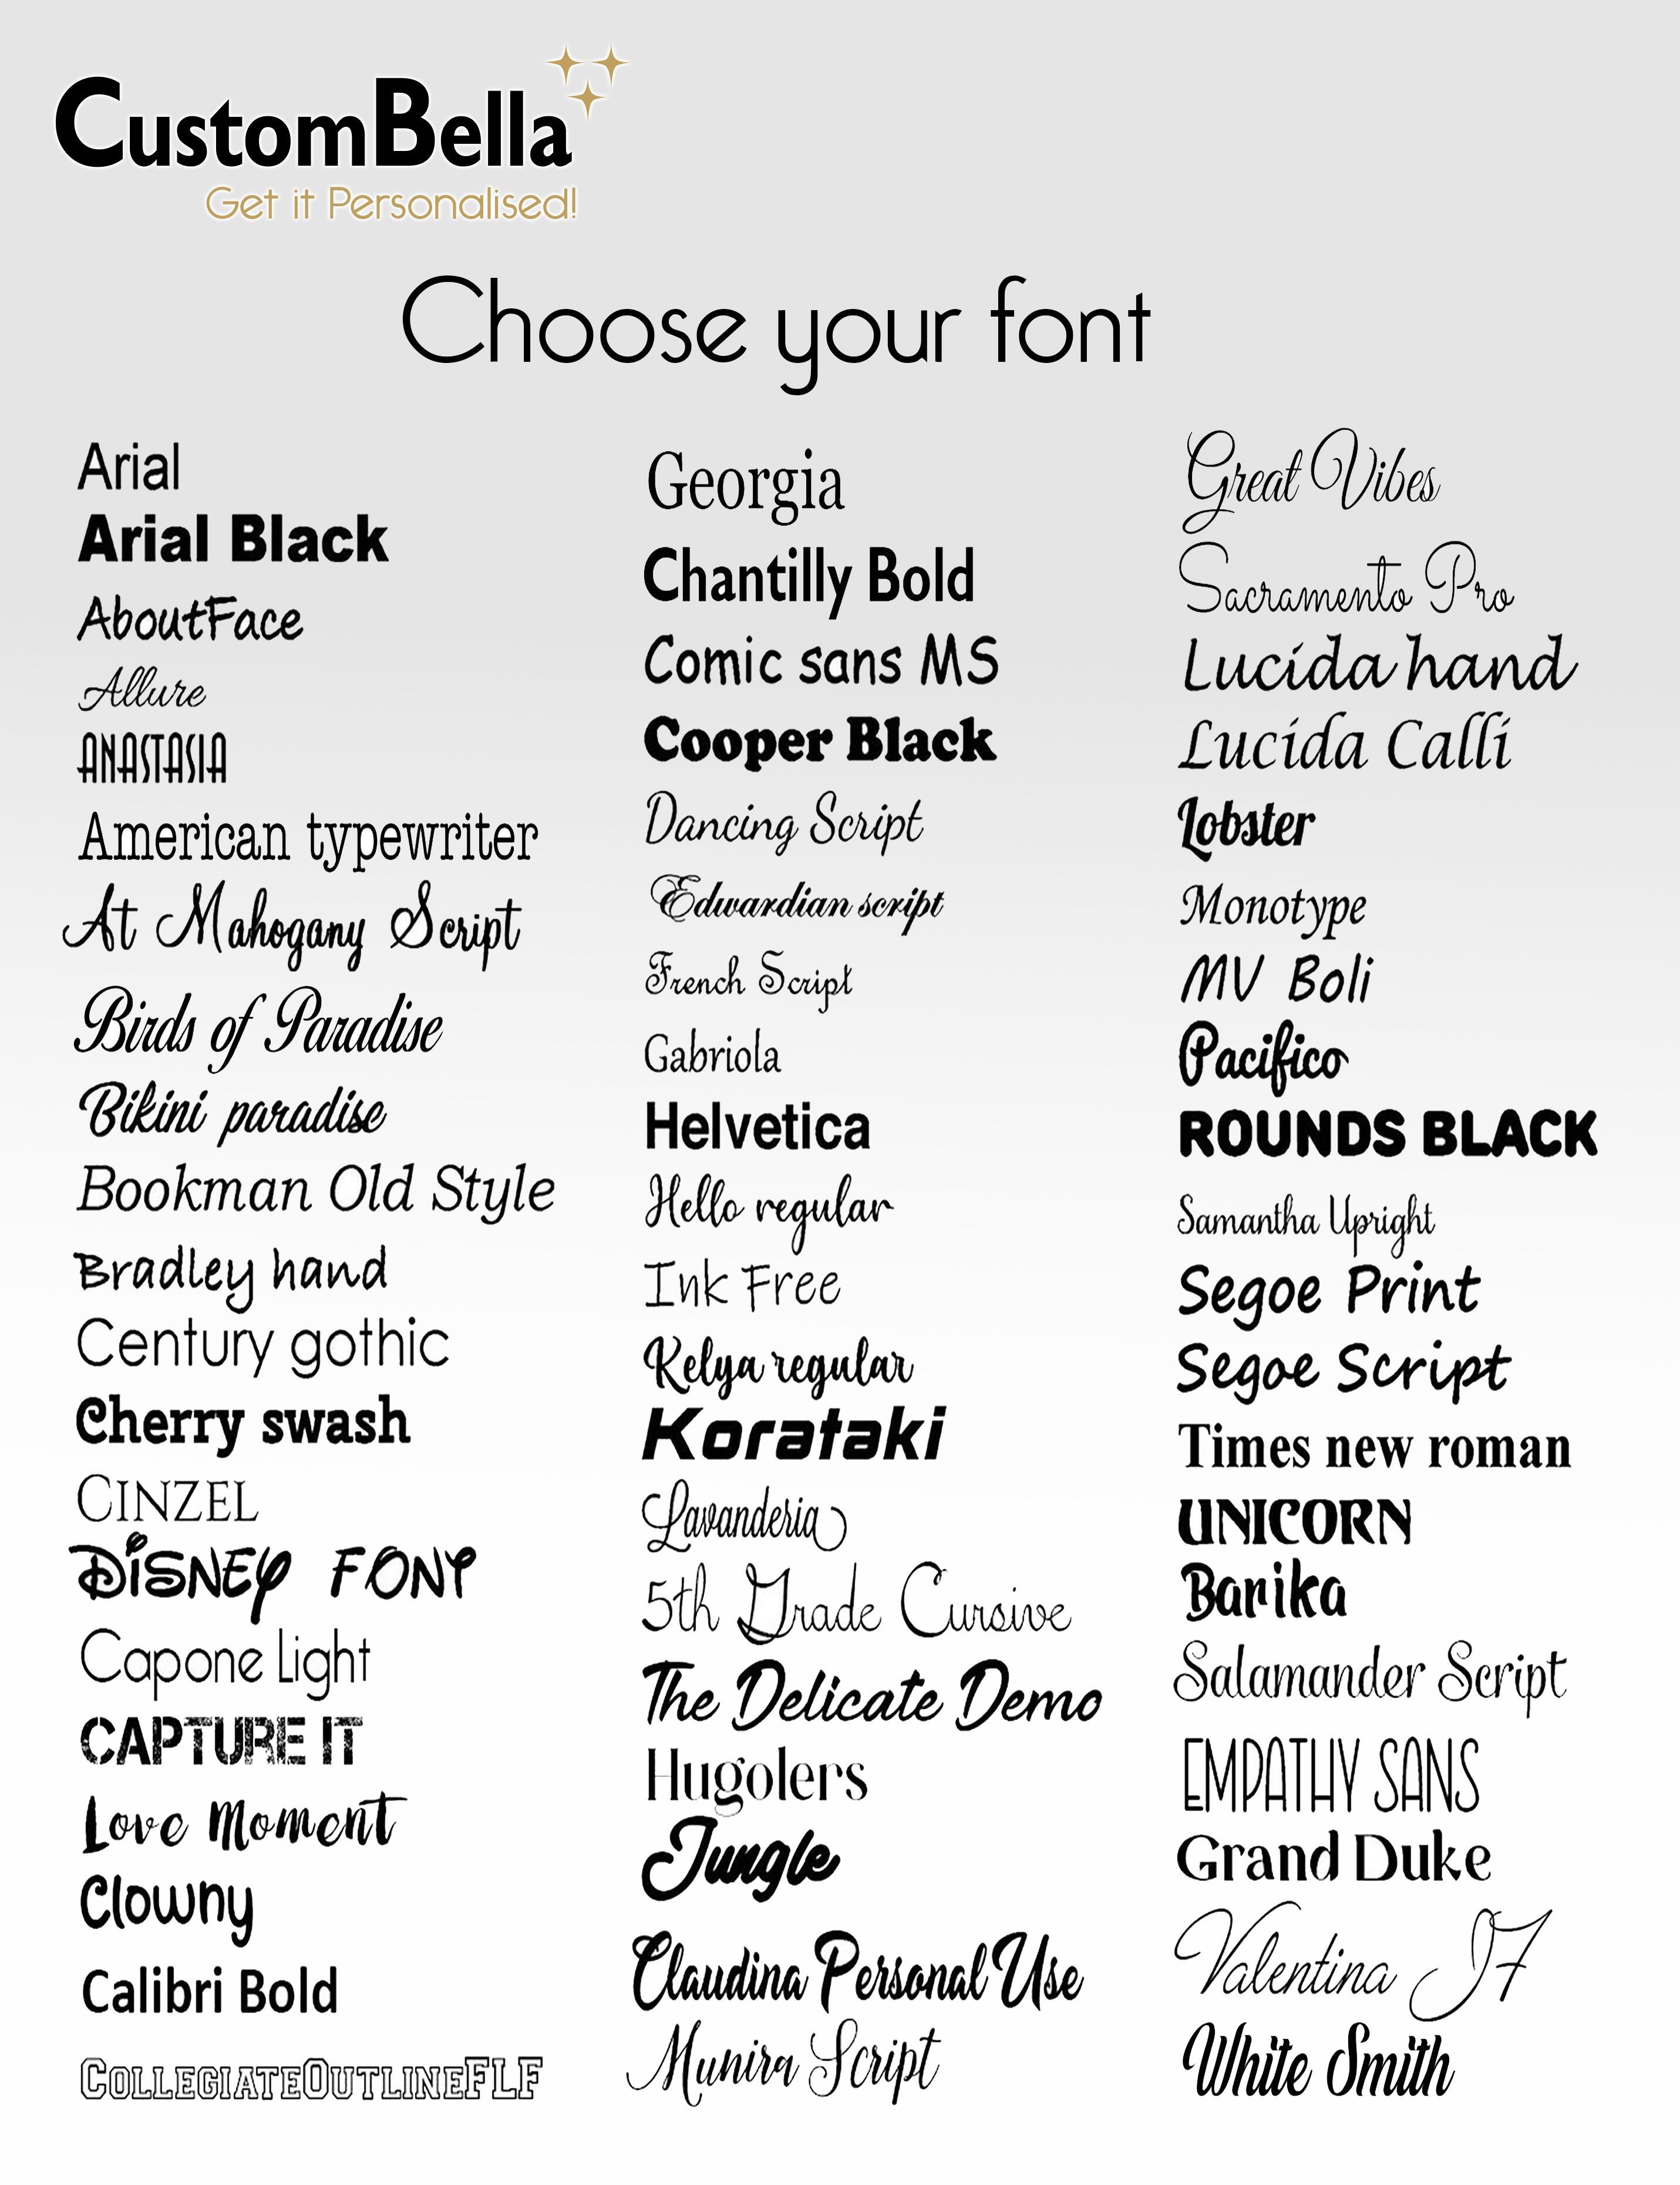 Custombelal fonts to select to print